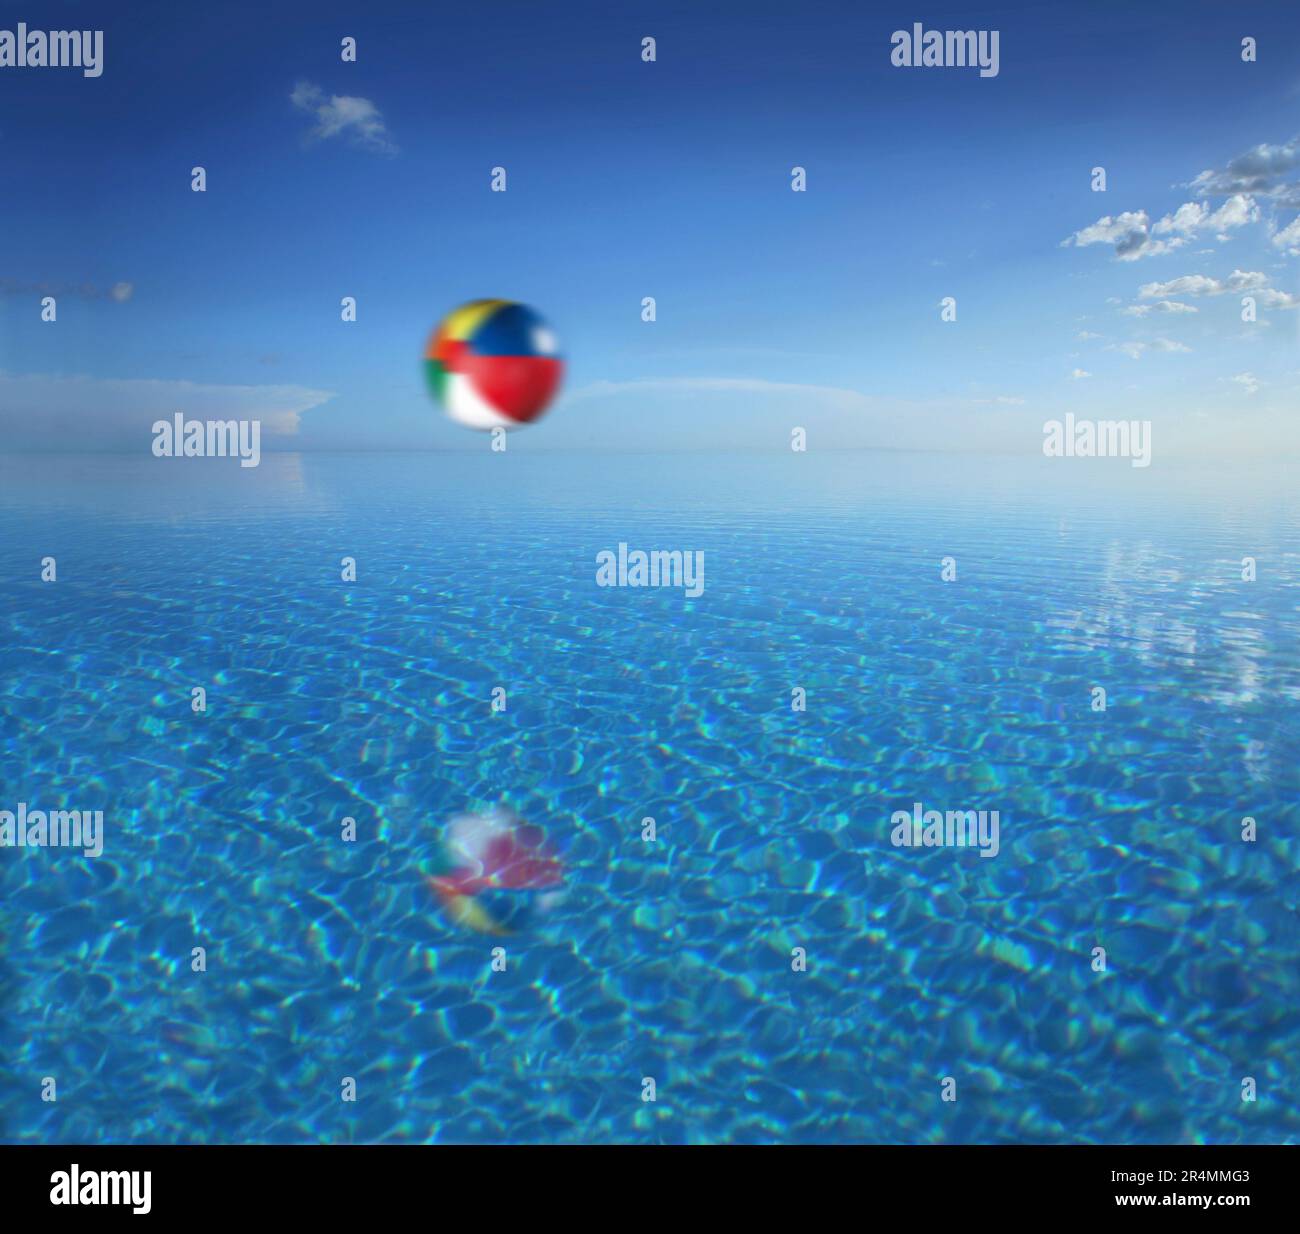 Ball flying over an infinity pool at a hotel resort in the Philippines. Stock Photo